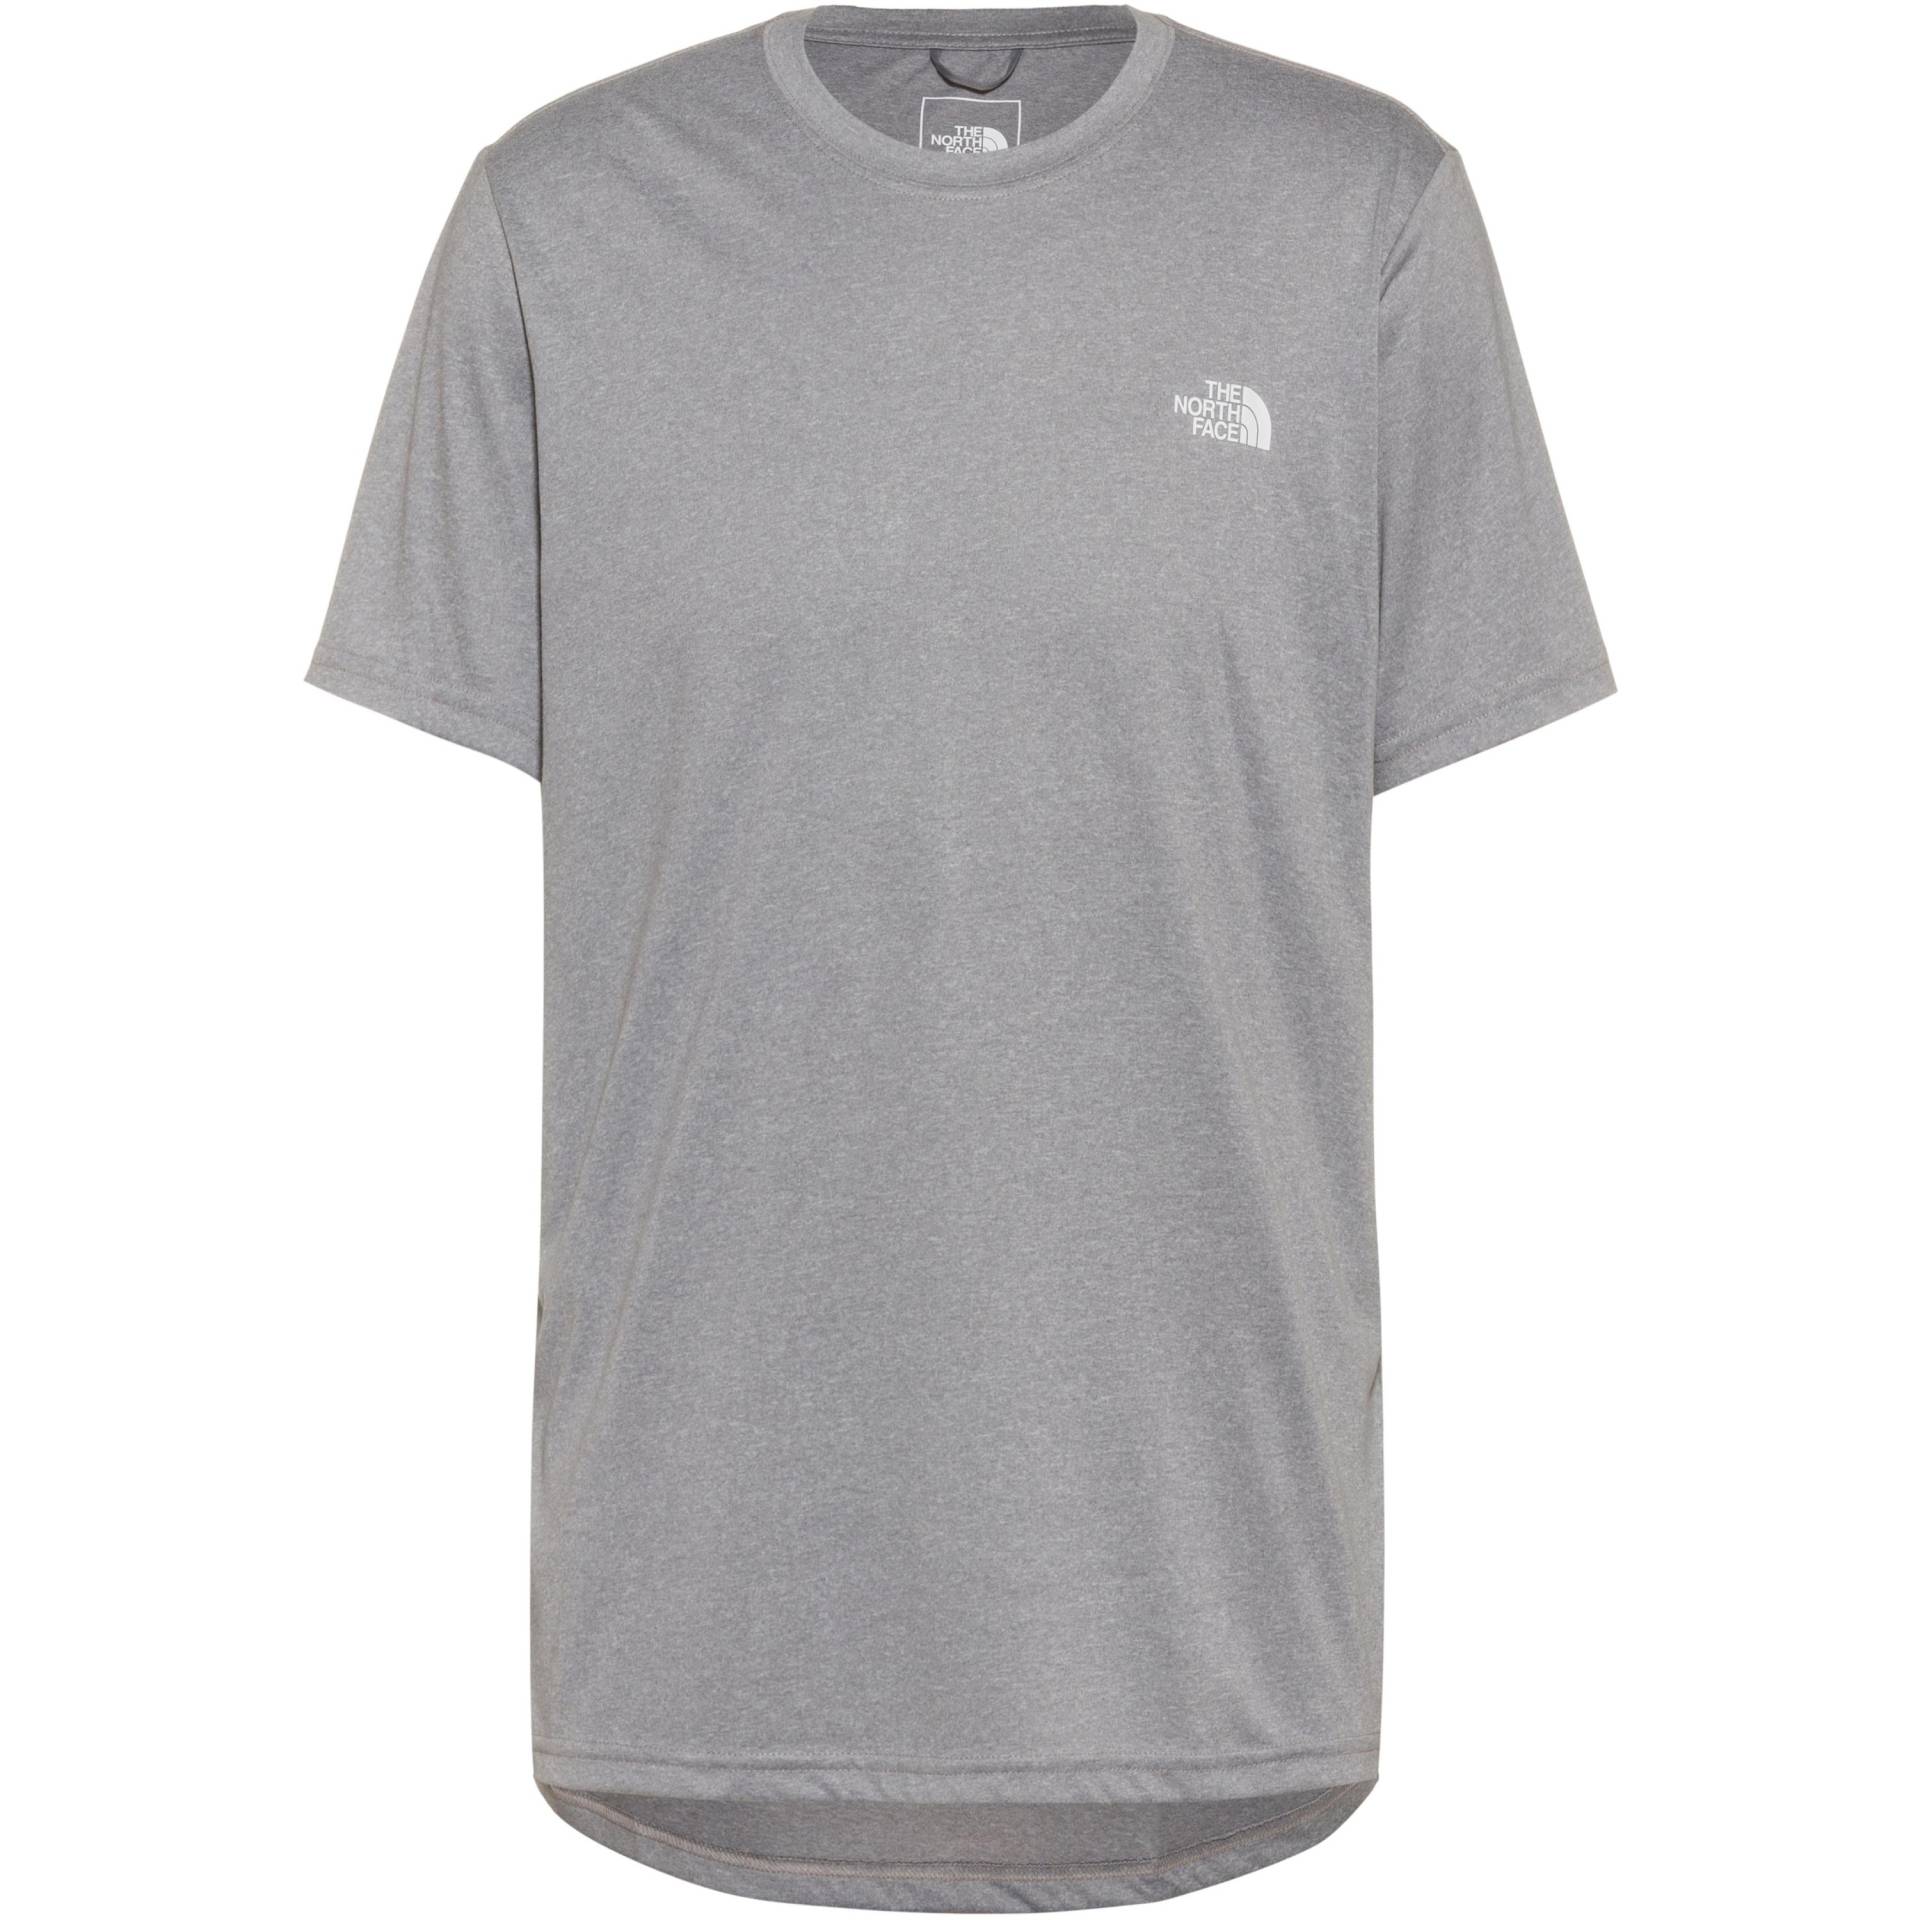 The North Face Reaxion Amp Funktionsshirt Herren von The North Face